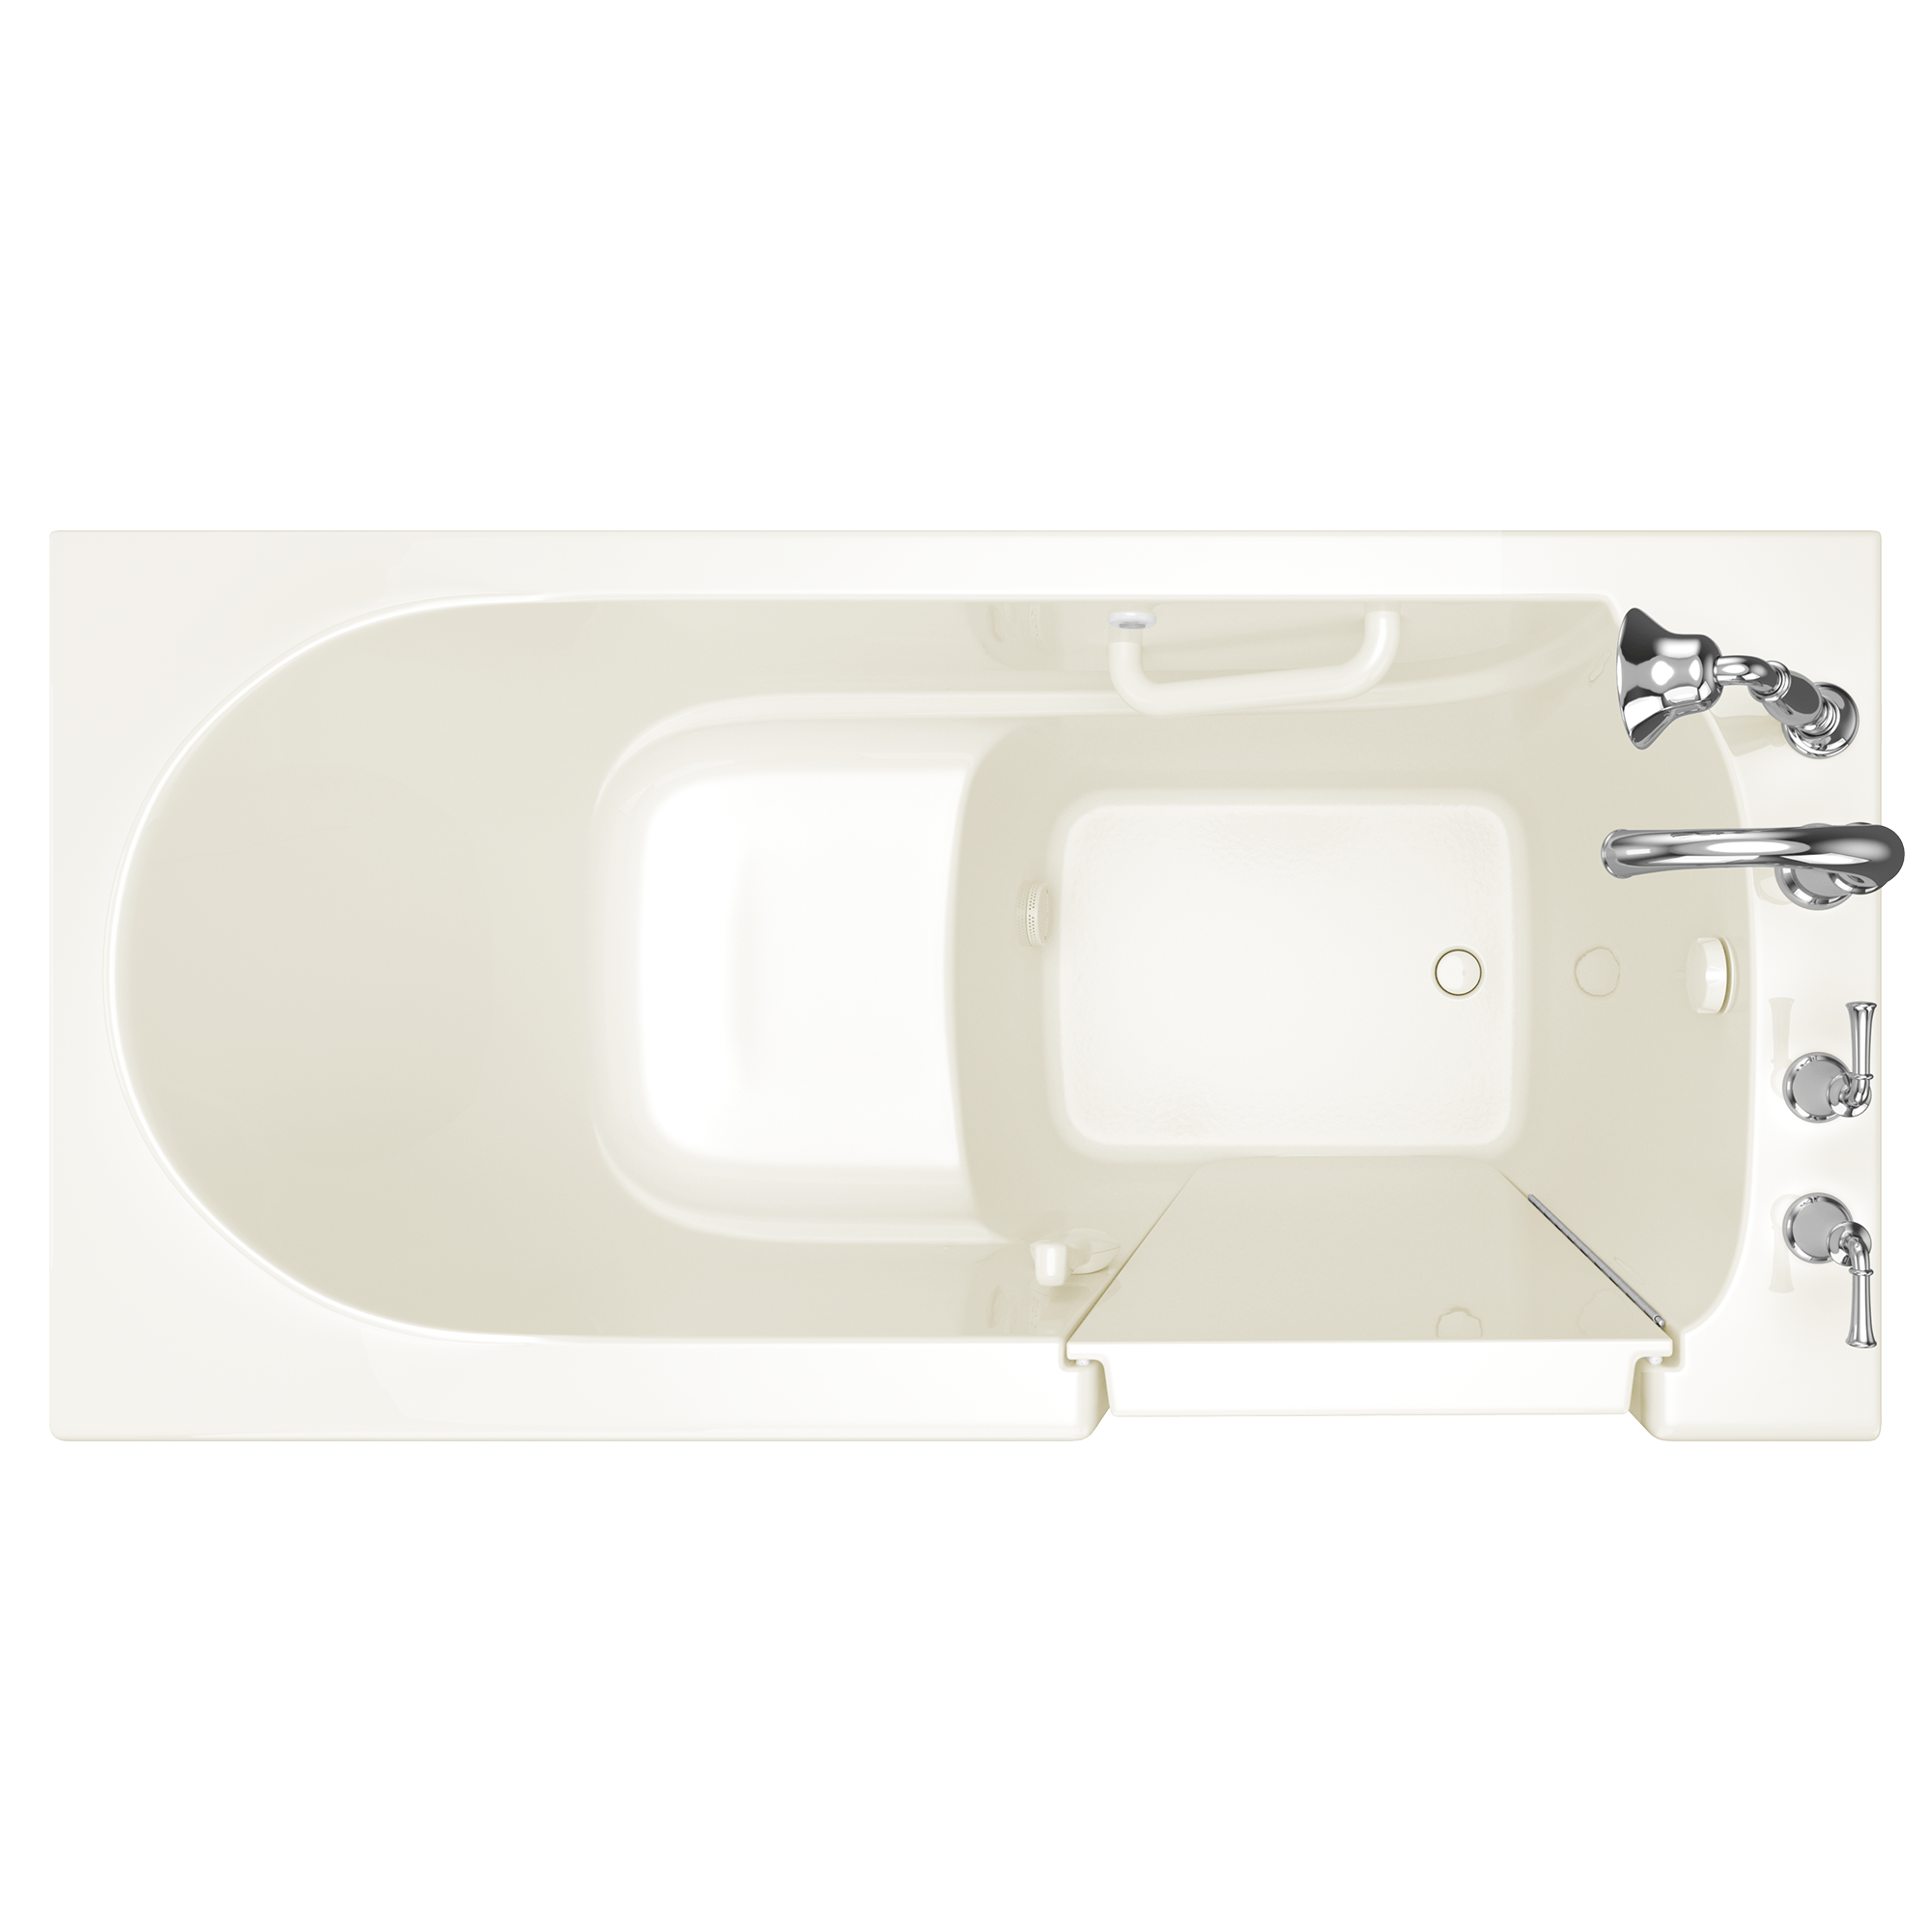 Gelcoat Value Series 30 x 60  Inch Walk in Tub With Soaker System   Right Hand Drain With Faucet WIB LINEN